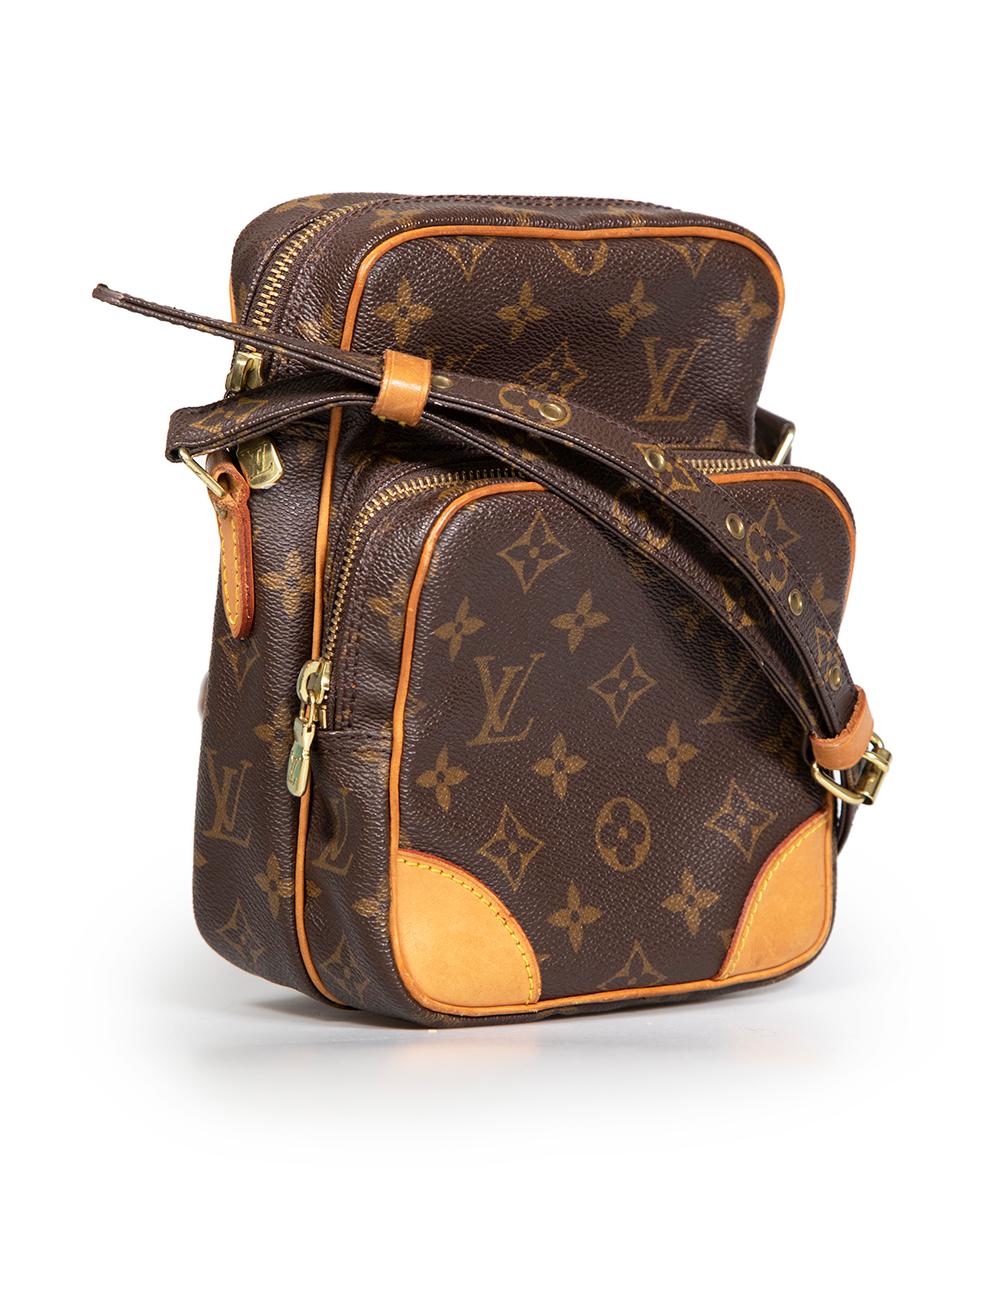 CONDITION is Good. Minor wear to bag is evident. Light wear to front, base, back, and leather trims with abrasions to the canvas and scratches to the metal hardware and cracking on the internal pocket on this used Louis Vuitton designer resale